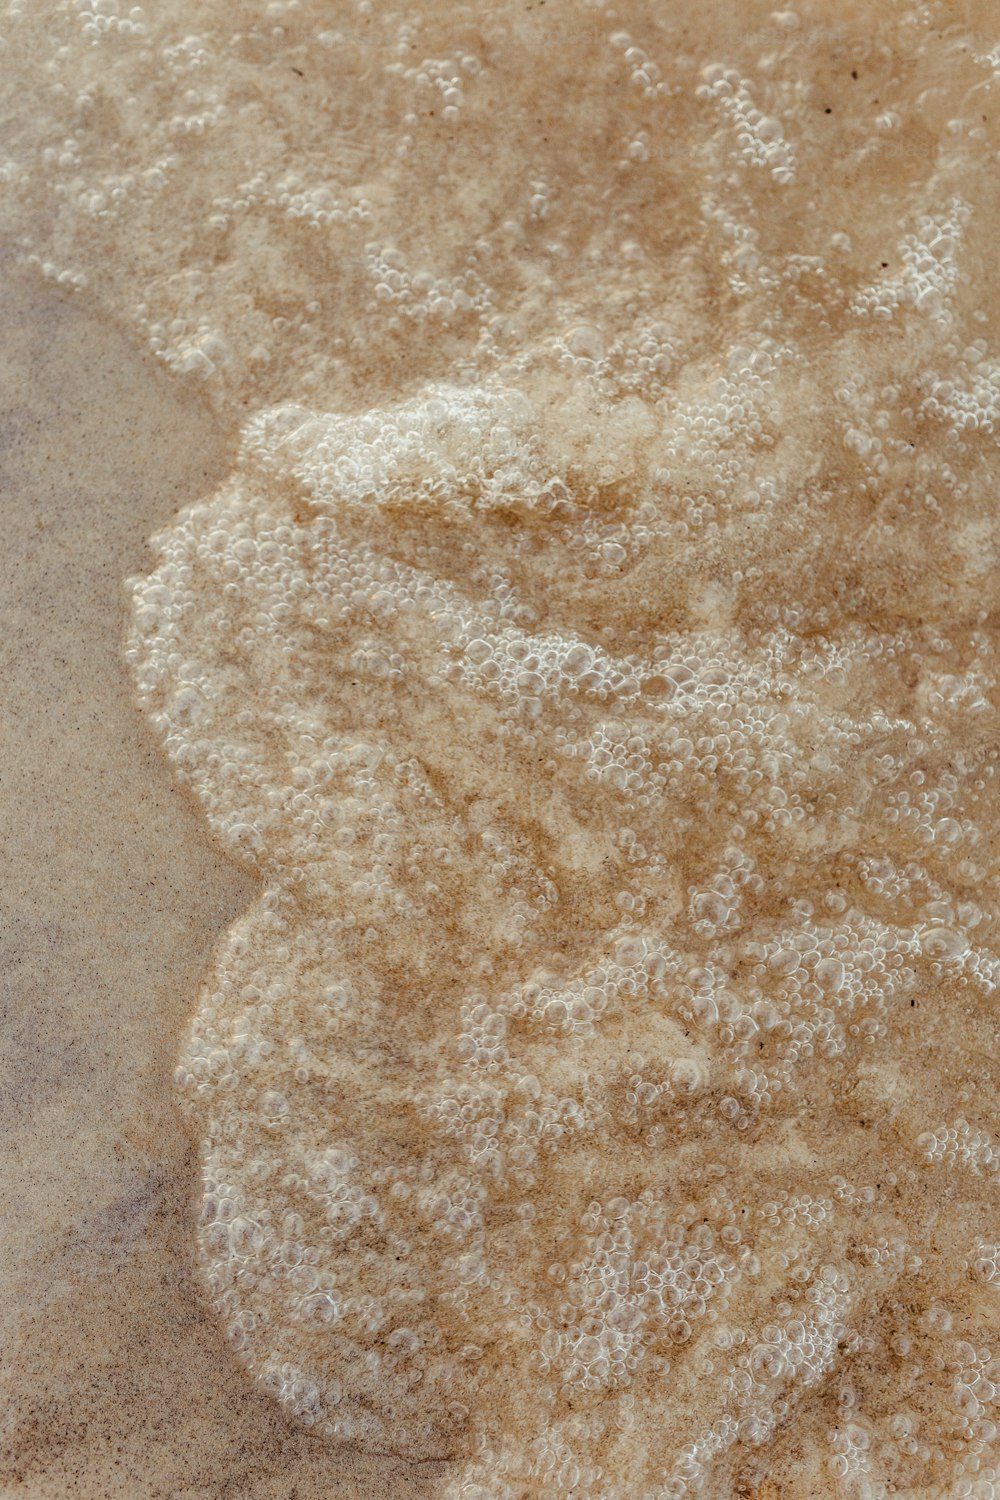 a close up of a pile of sand on the ground